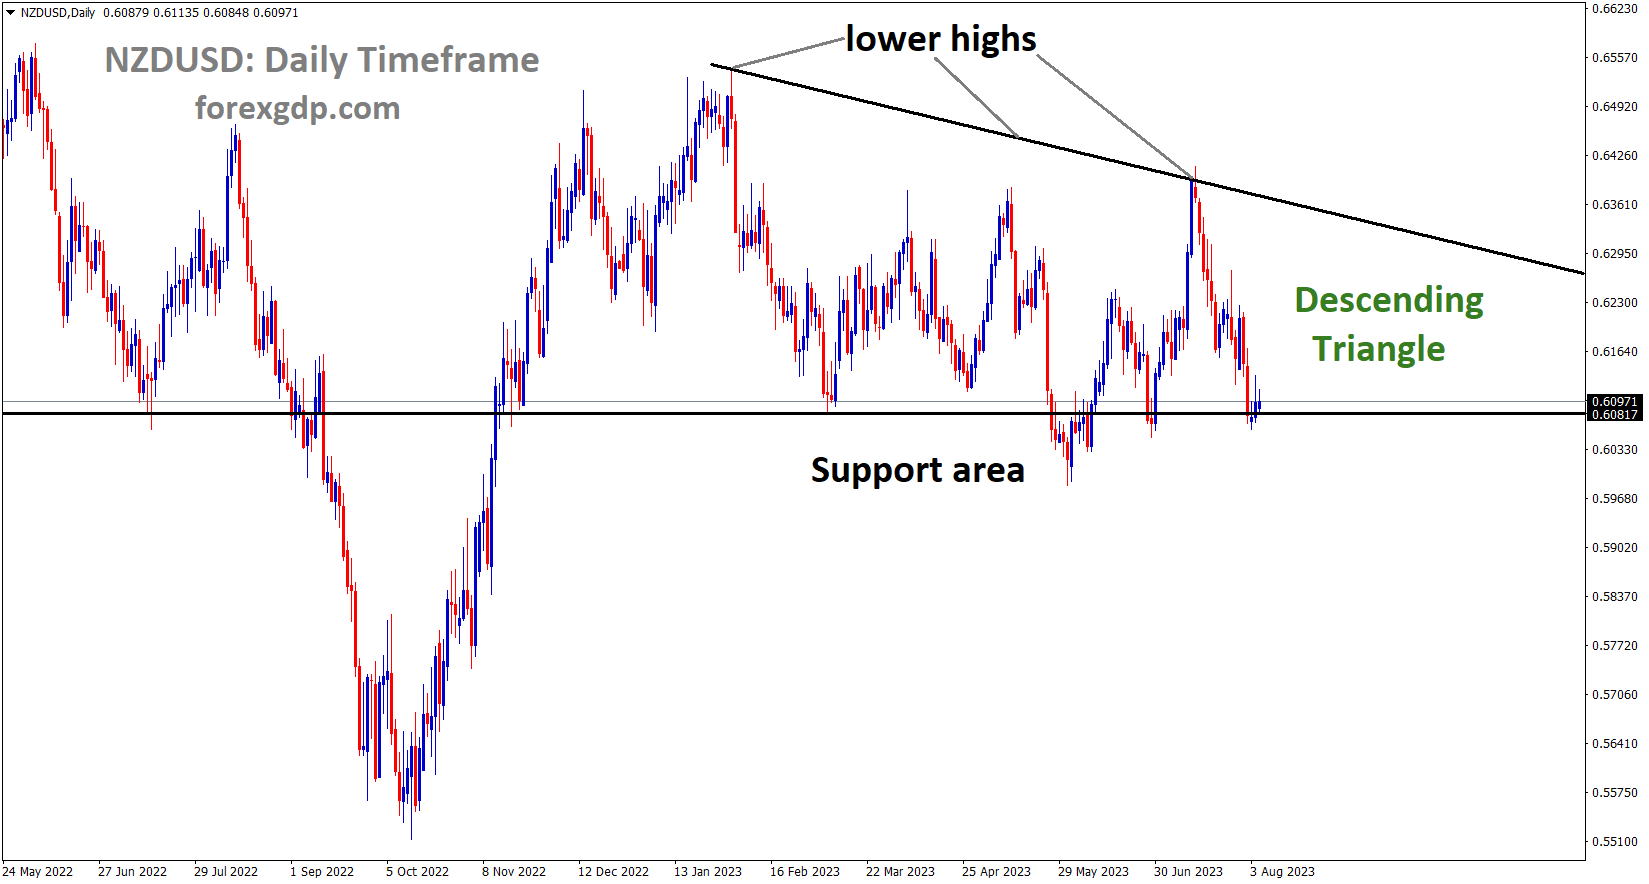 NZDUSD is moving in the Descending triangle pattern and the market has reached the horizontal support area of the pattern